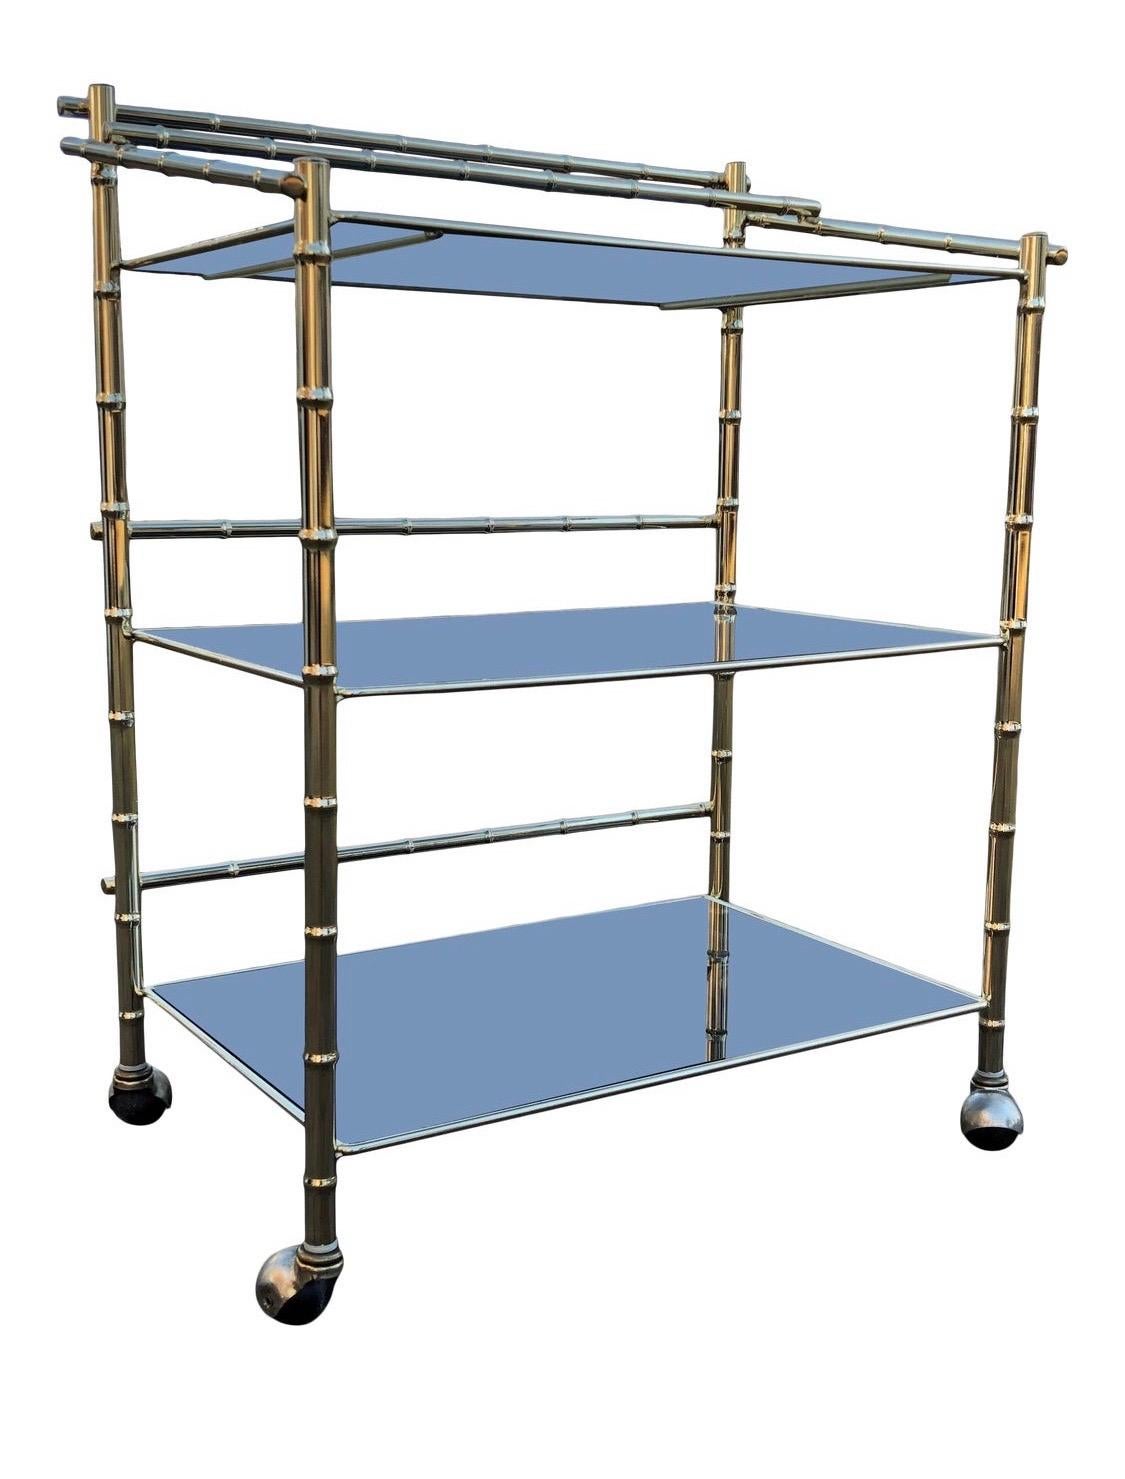 Elegant brass and smoked glass faux bamboo rolling bar cart. The smoked glass shelving is removable and everything is original. Very good vintage condition with little oxidation or pitting. Glass is in decent age appropriate condition. 

Believed